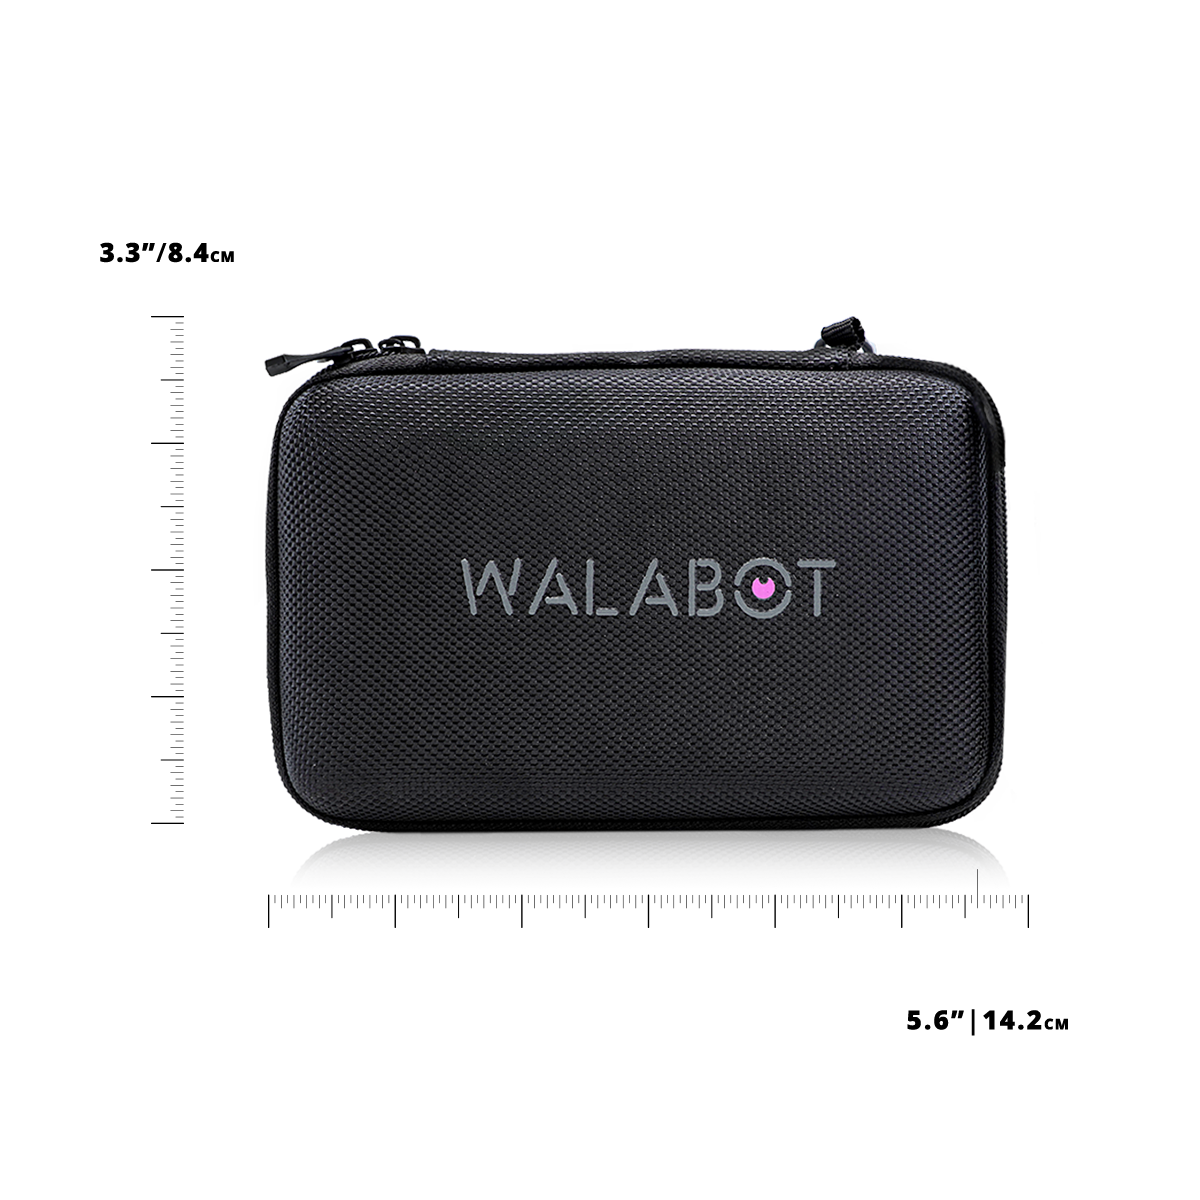 Walabot DIY 2 in-wall imager now works with iPhone + Android - 9to5Toys